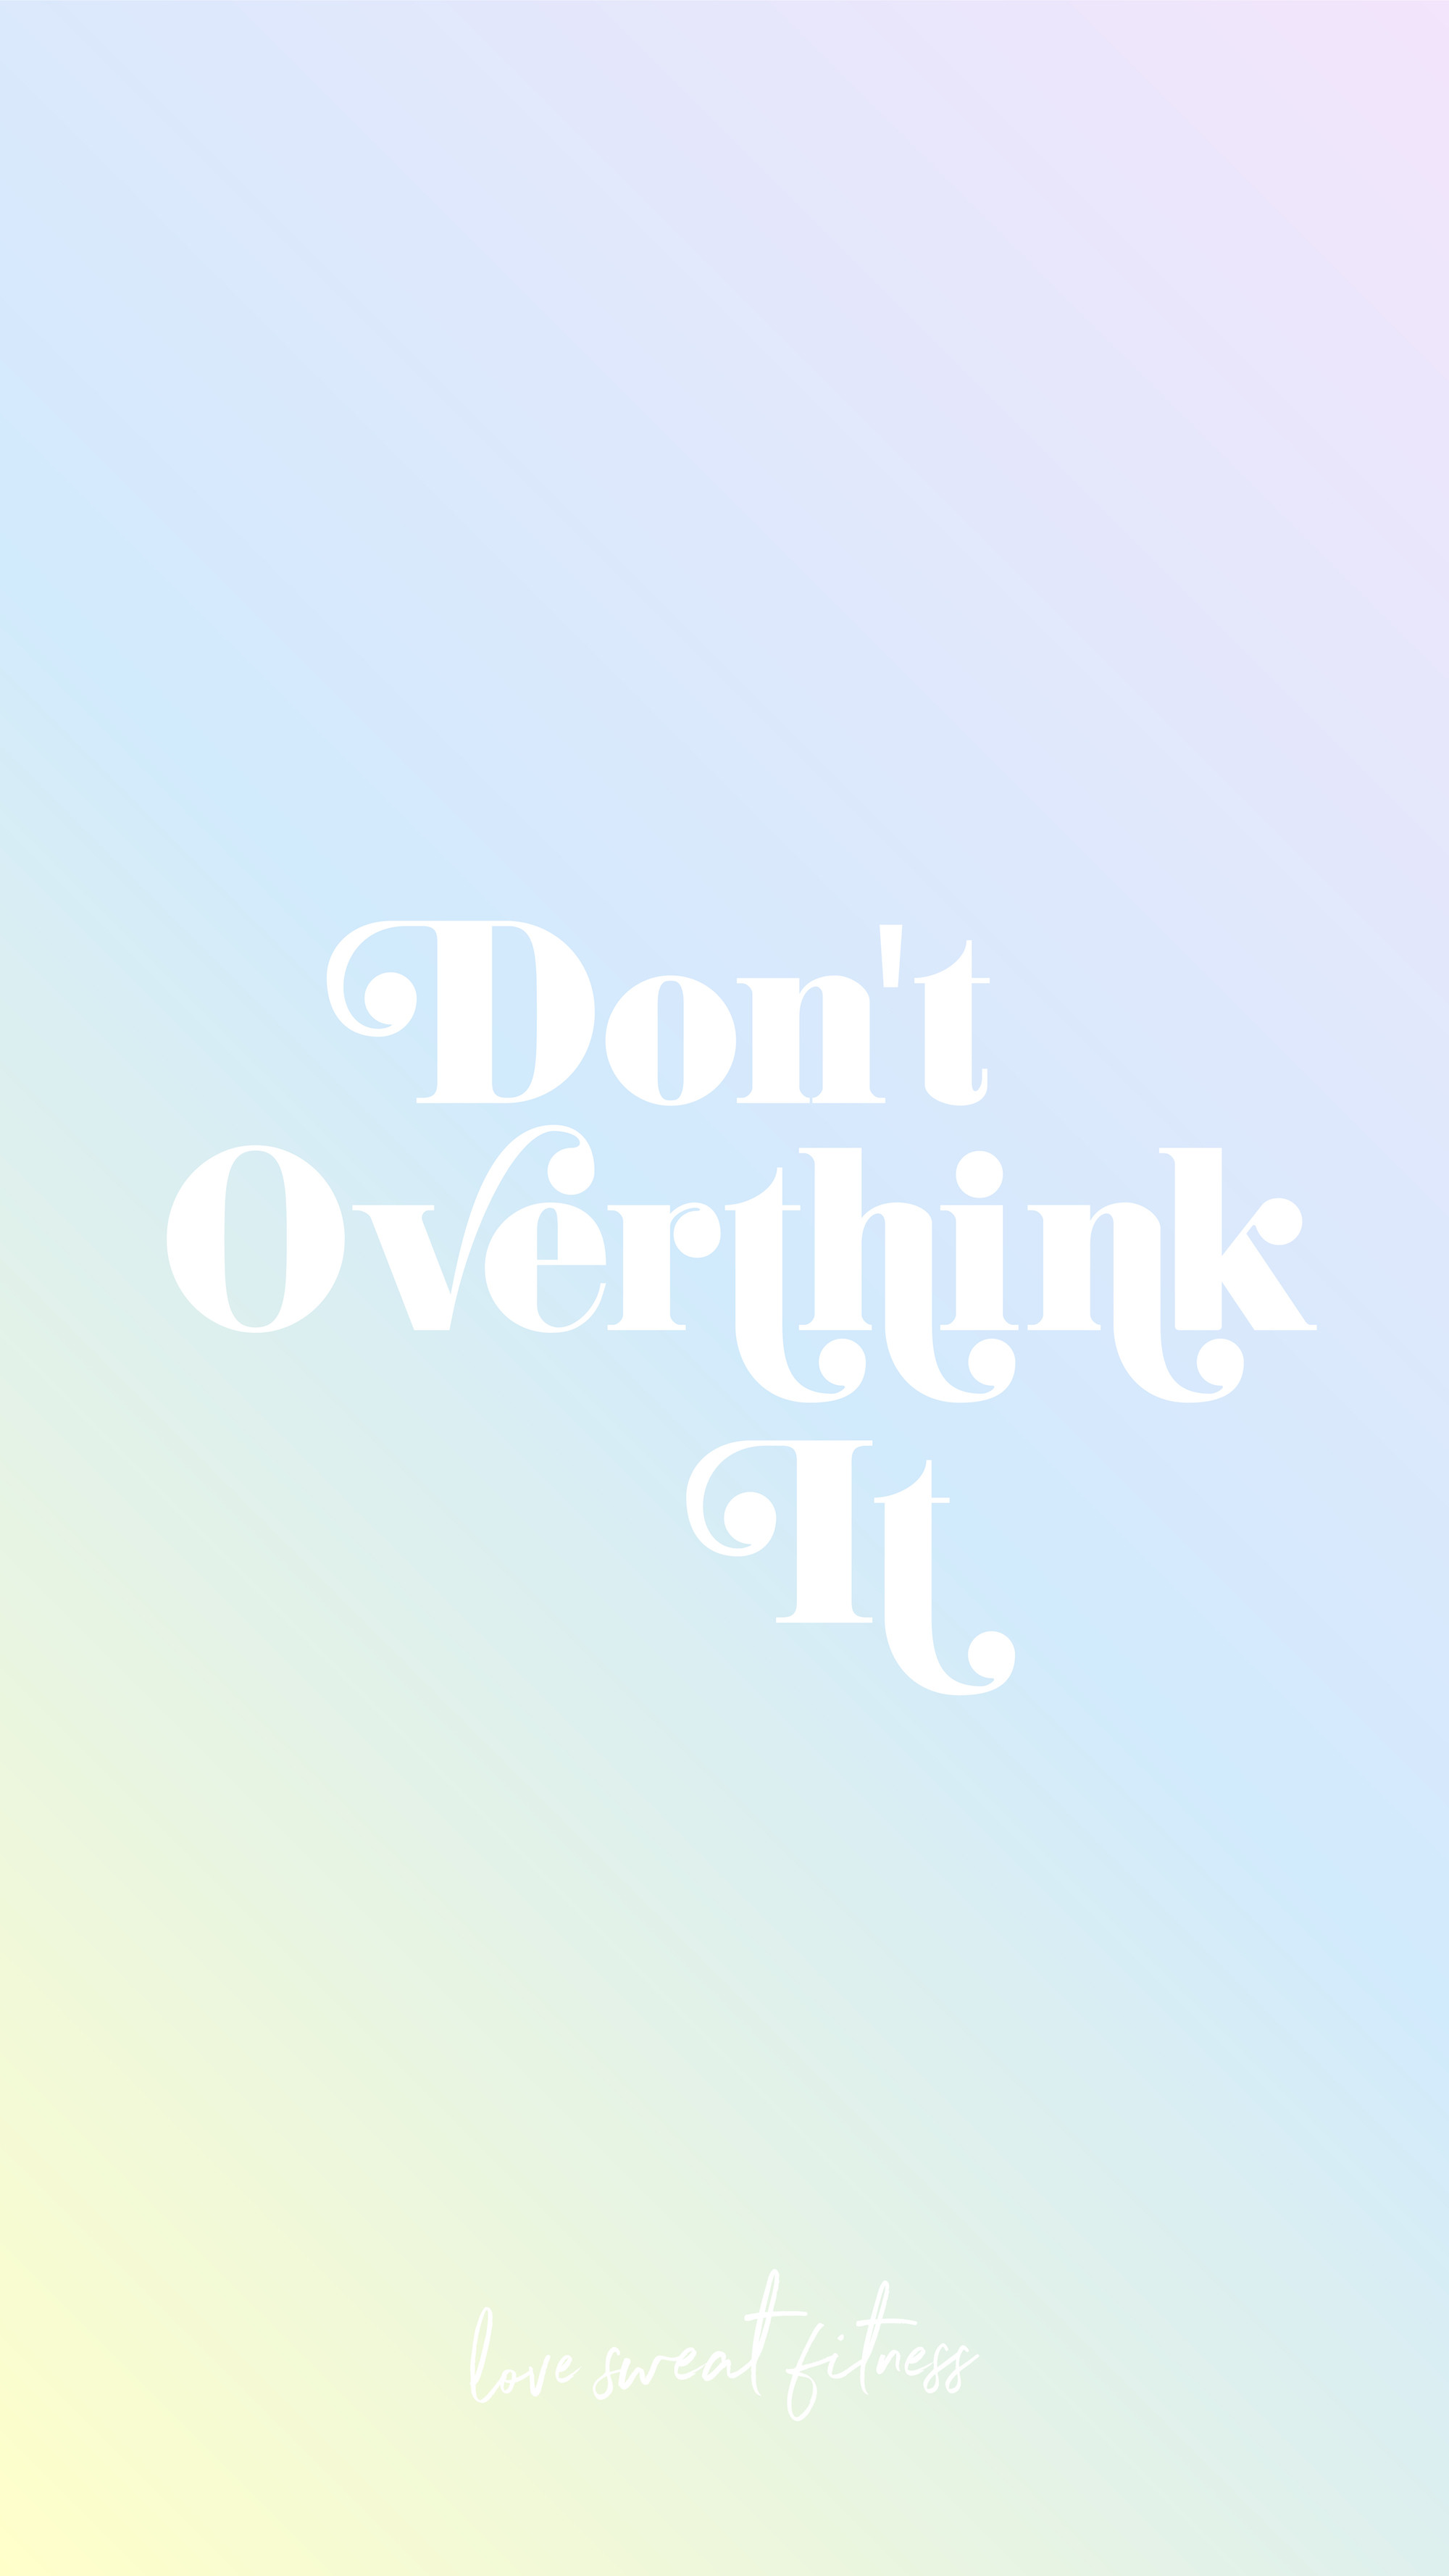 Cute Phone Wallpaper, Phone Background, Motivational - Don T Overthink It Phone - HD Wallpaper 